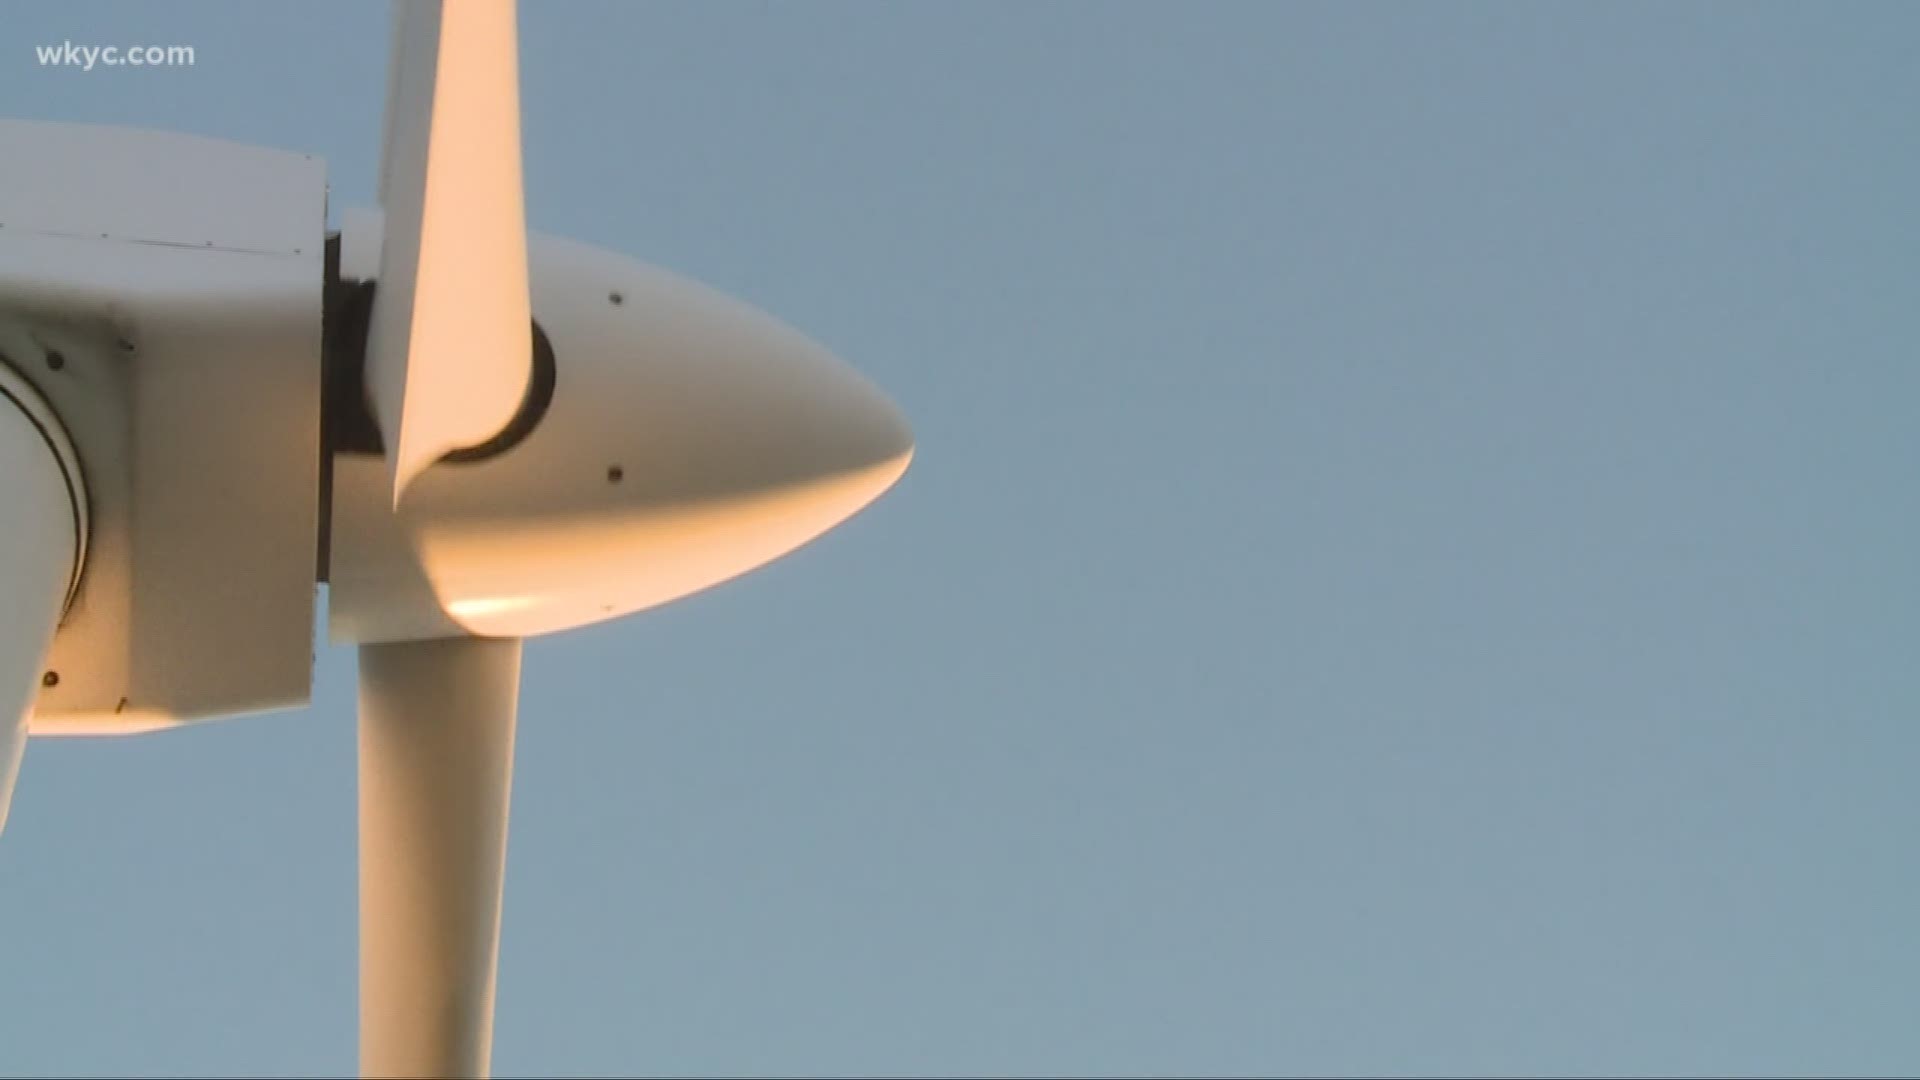 What are the pros and cons of proposed wind turbine facility on Lake Erie?